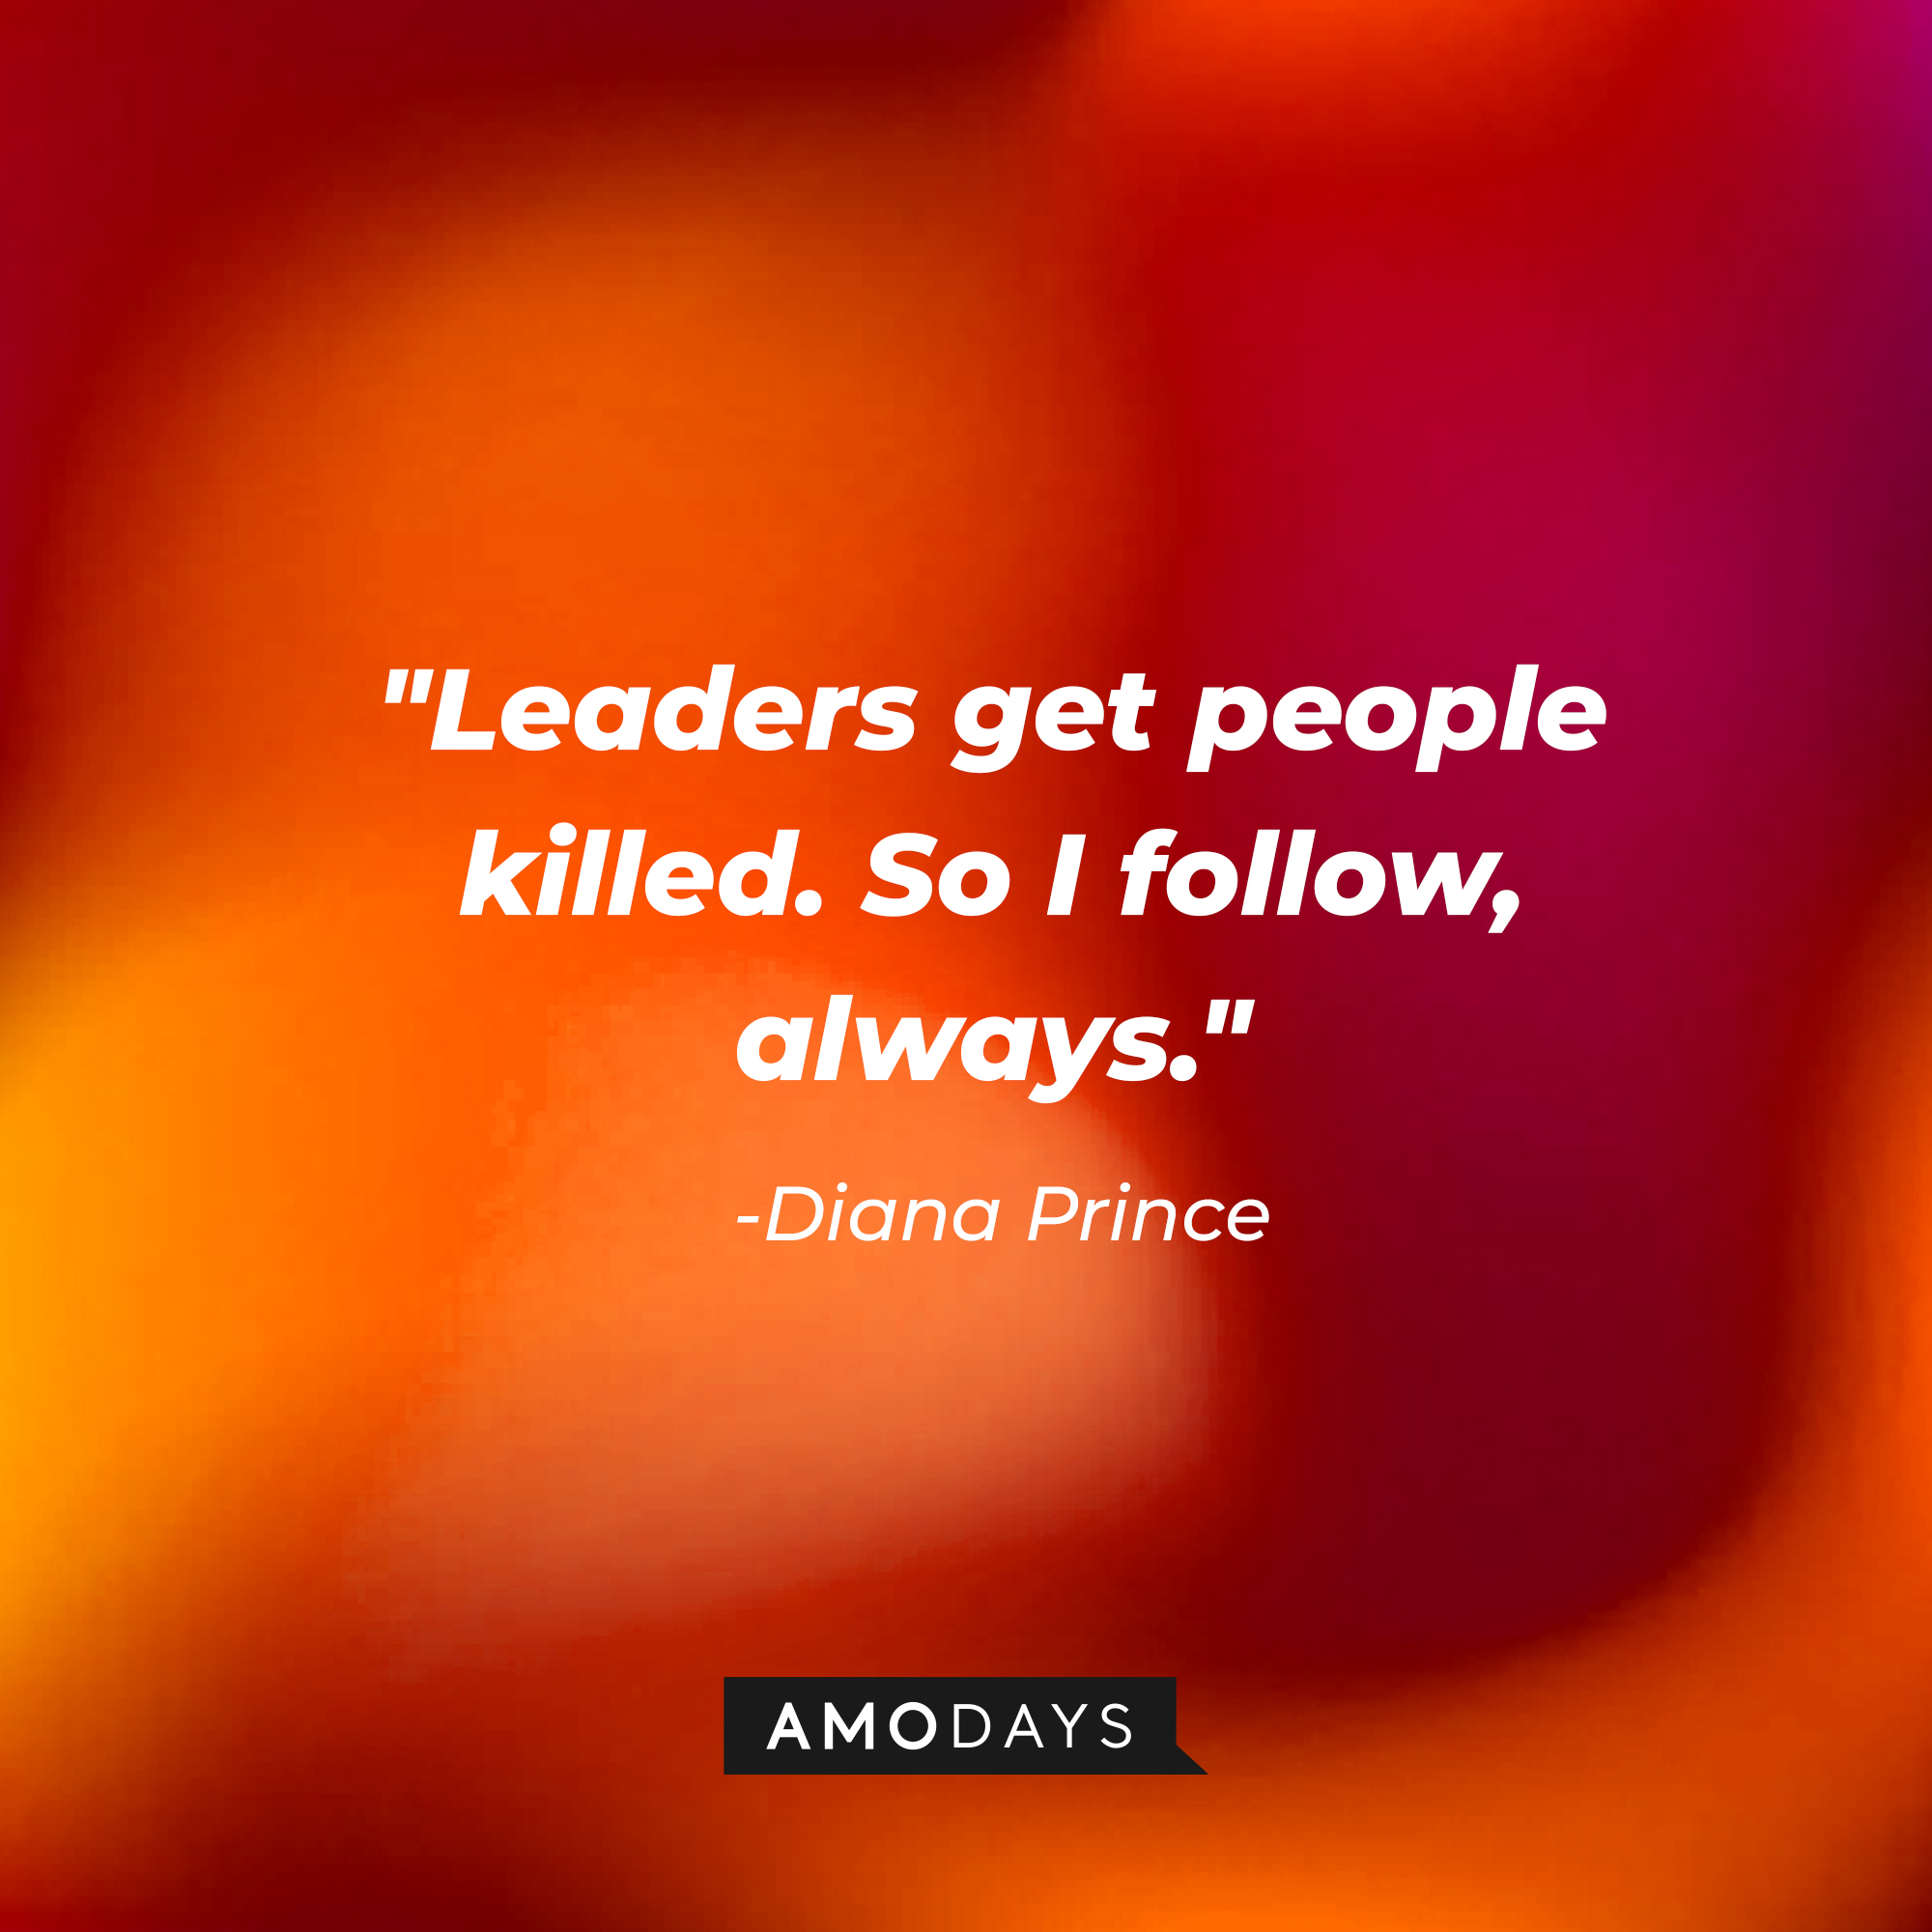 Diana Prince's quote, "Leaders get people killed. So I follow, always." | Source: AmoDays